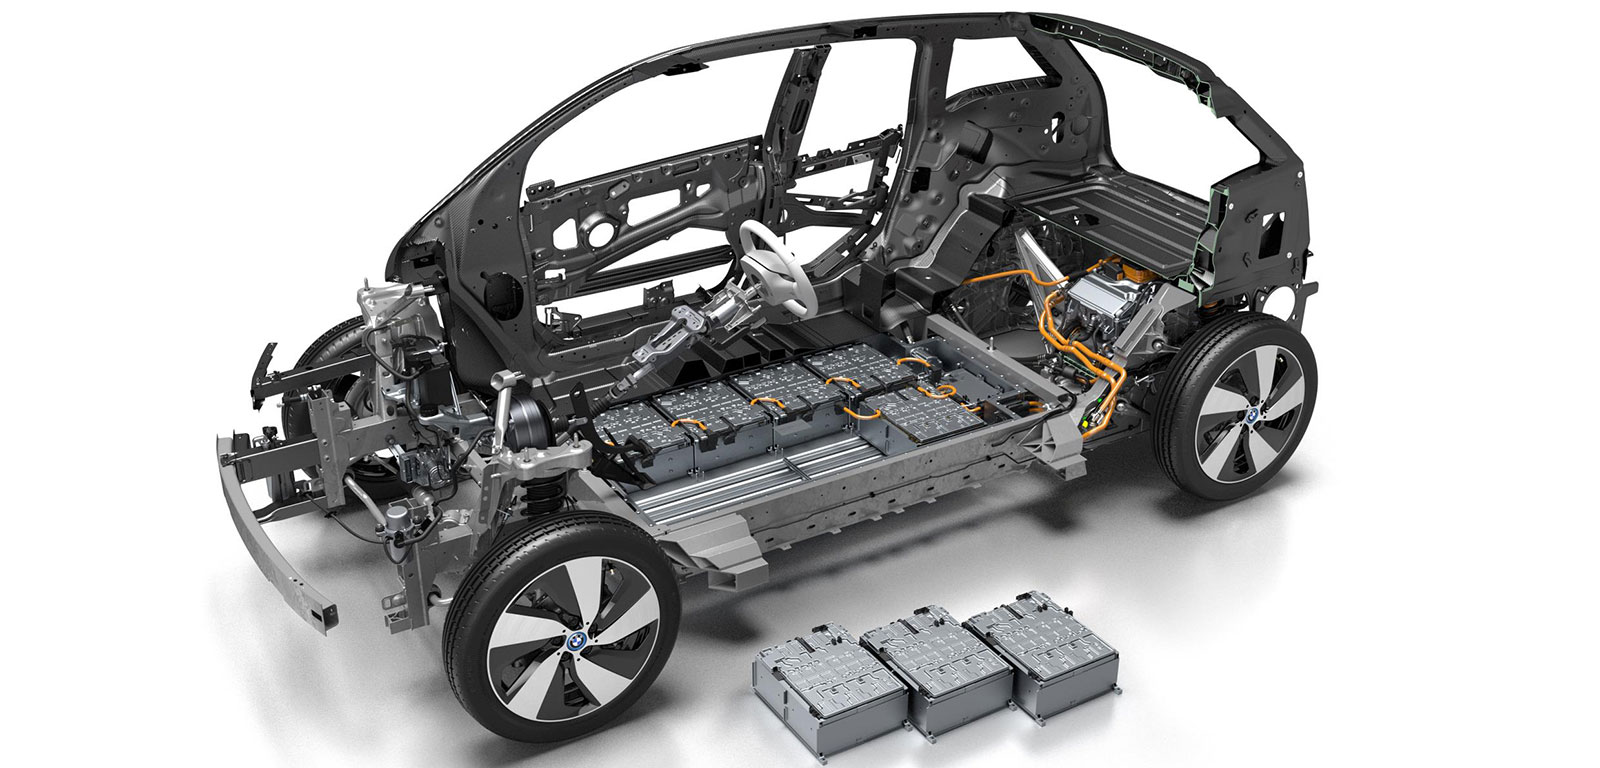 Extended warranties for electric vehicles